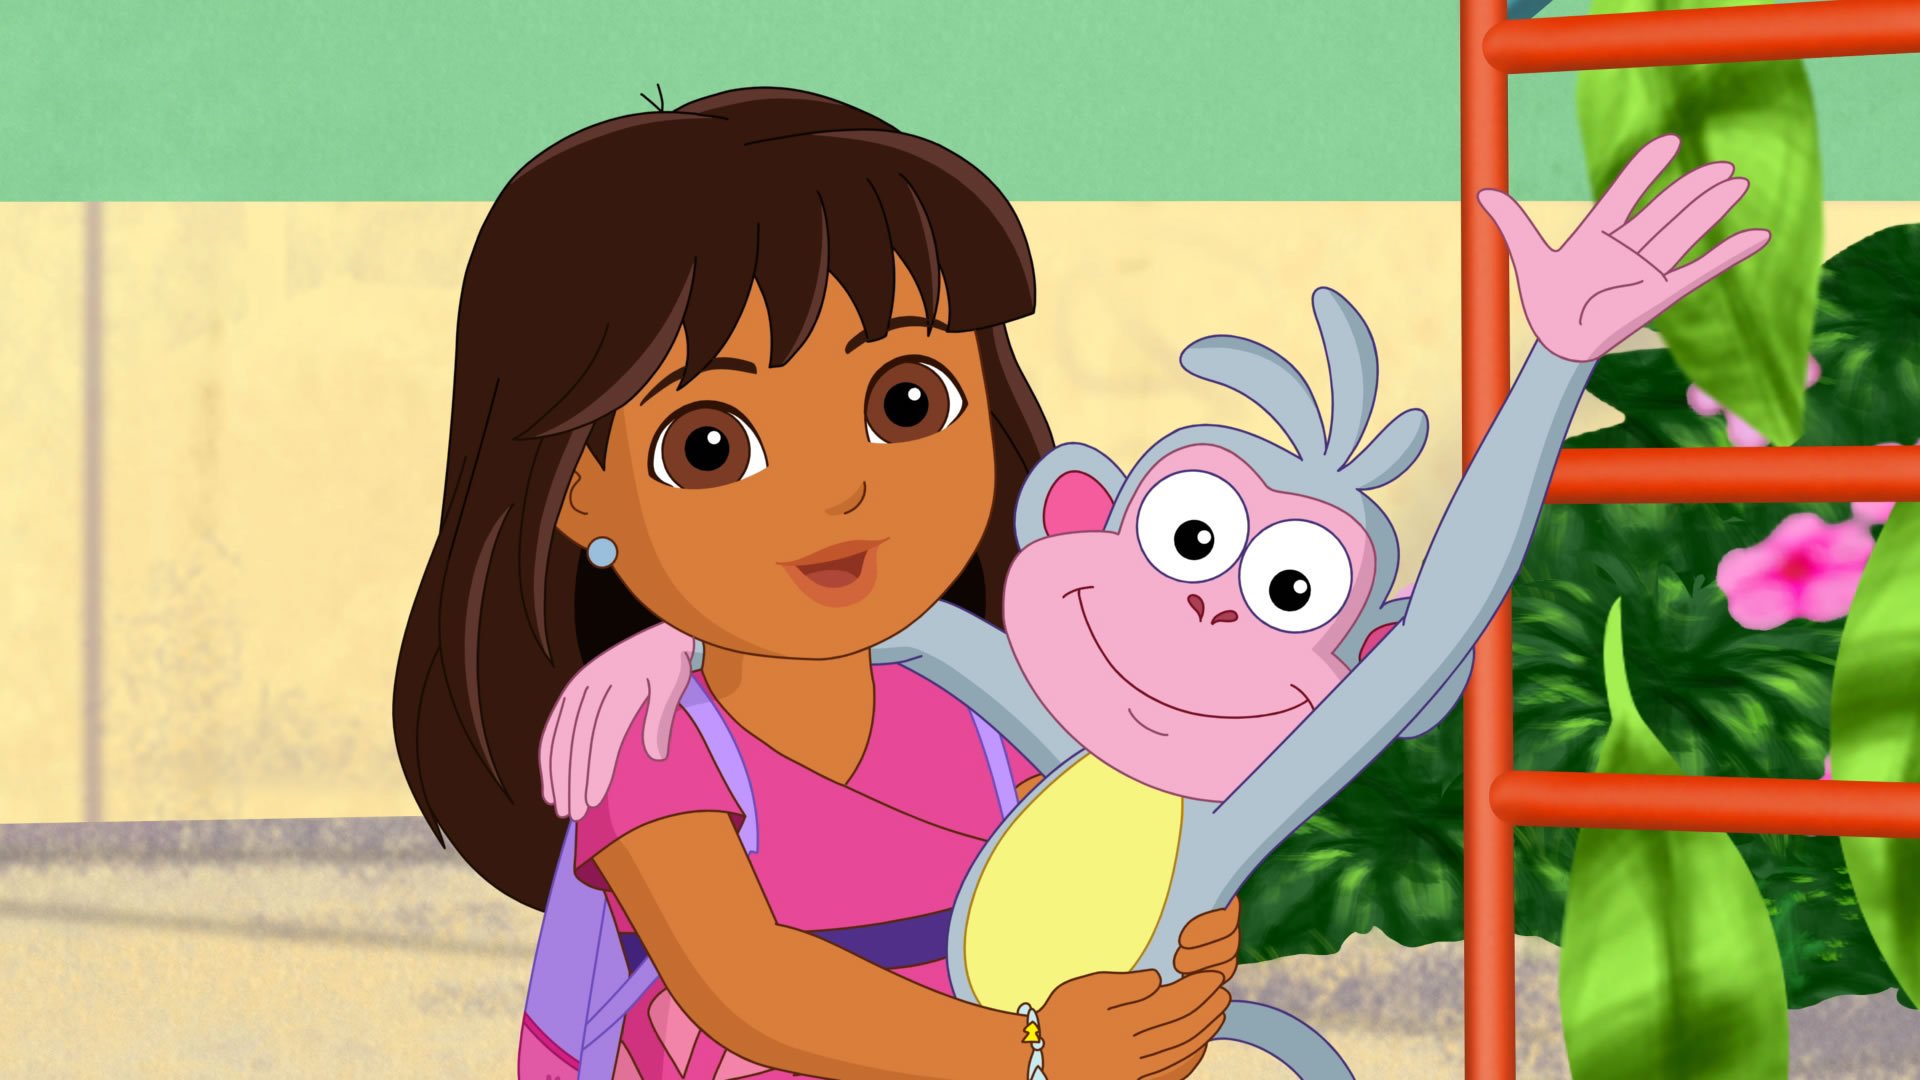 Dora Reunites with Boots, Backpack and Her Rainforest Friends in Nickelodeon's Dora and Friends: Into the City!